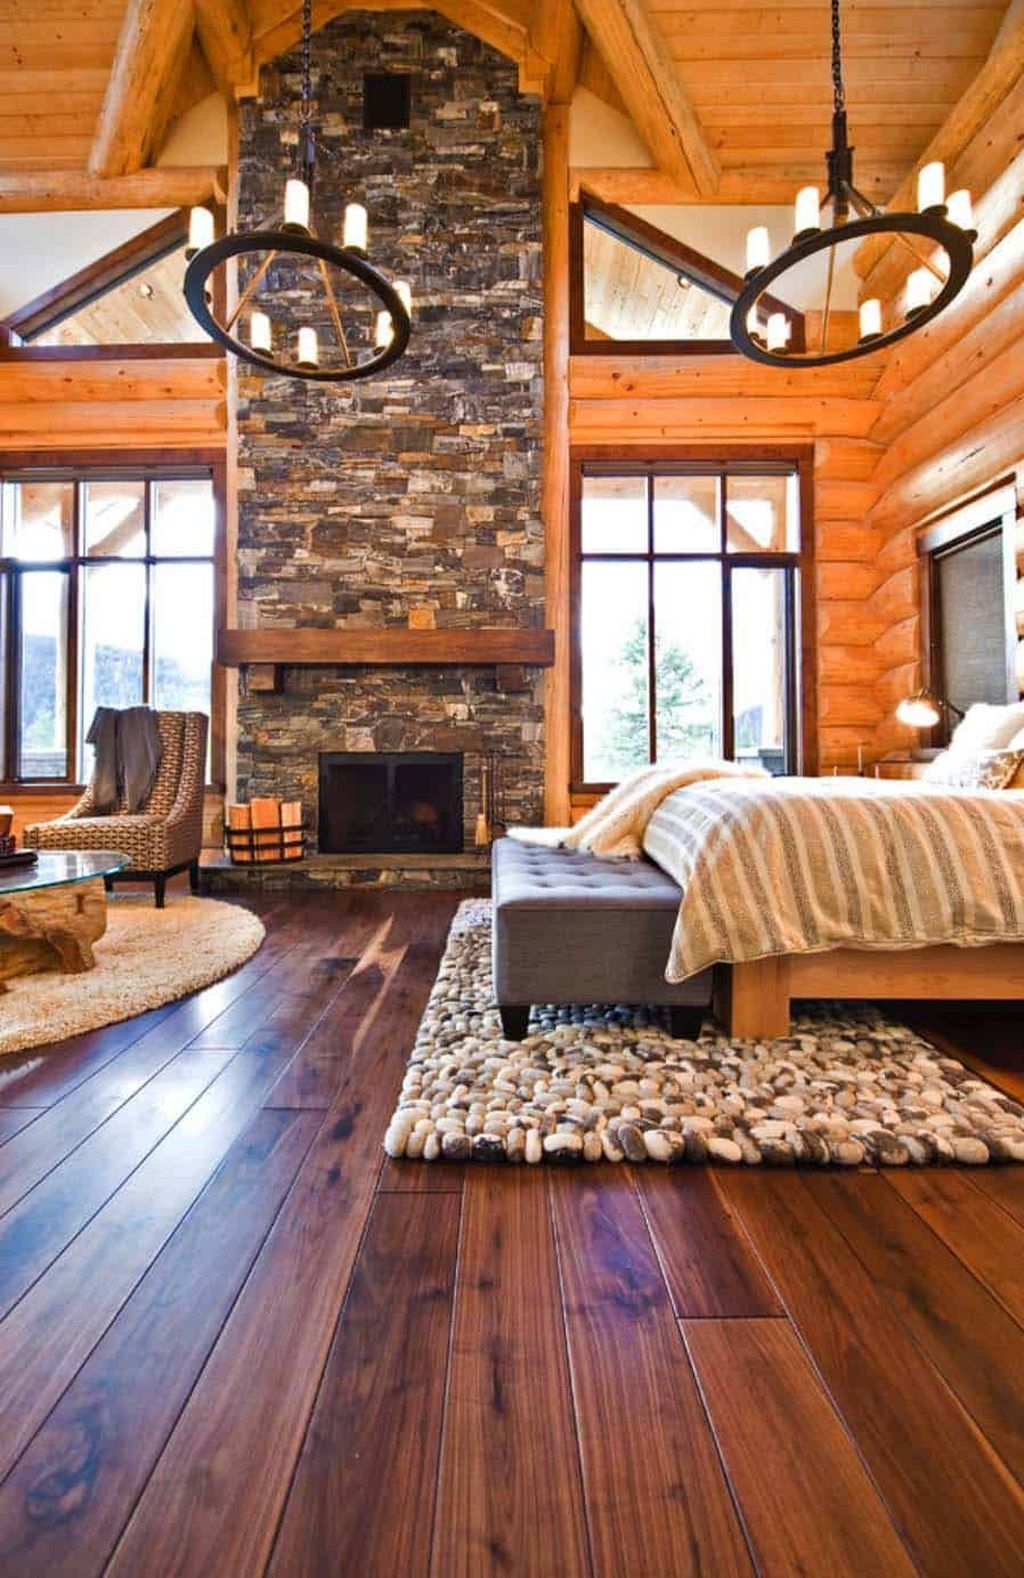 Gorgeous Log Cabin Style Home Interior Design12